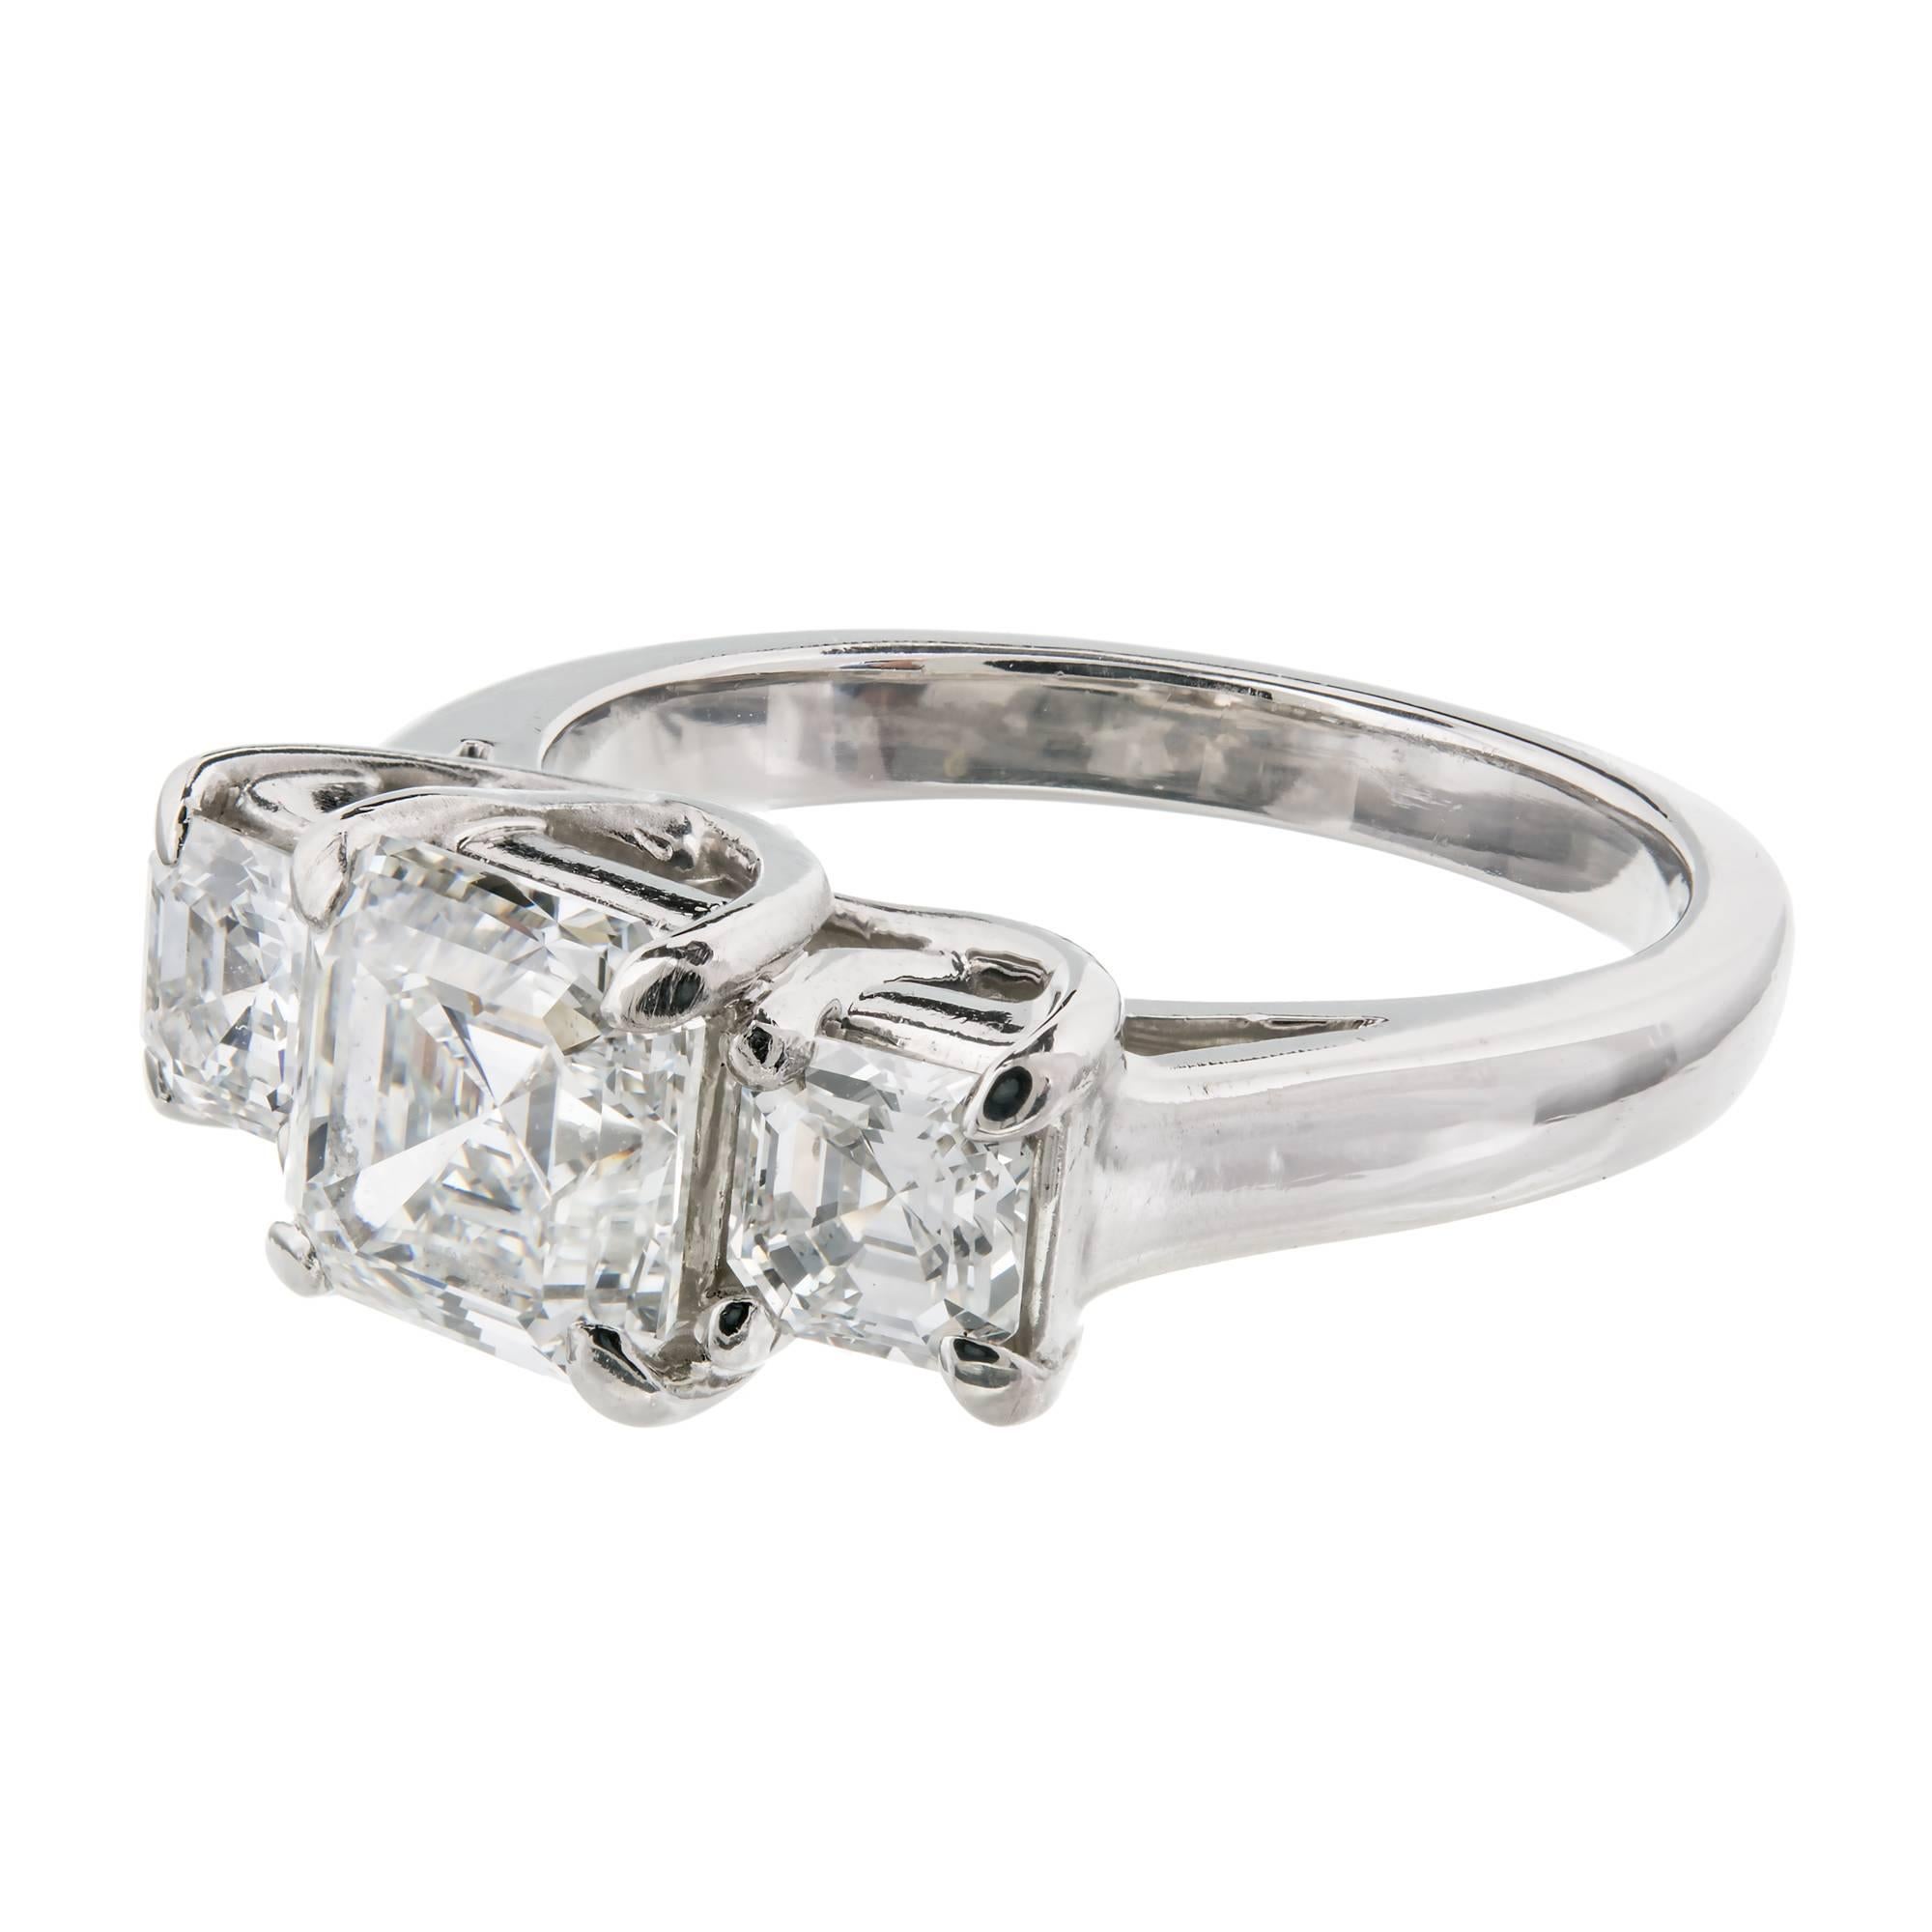 Hammerman Brothers custom-made Lucida style 3 stone Asscher cut Diamond engagement ring. Triple crossed prongs. All Diamonds have a very bright cut and lots of sparkle. The center Diamond is GIA certified 1.84cts, F color and VVS1 clarity. 

1